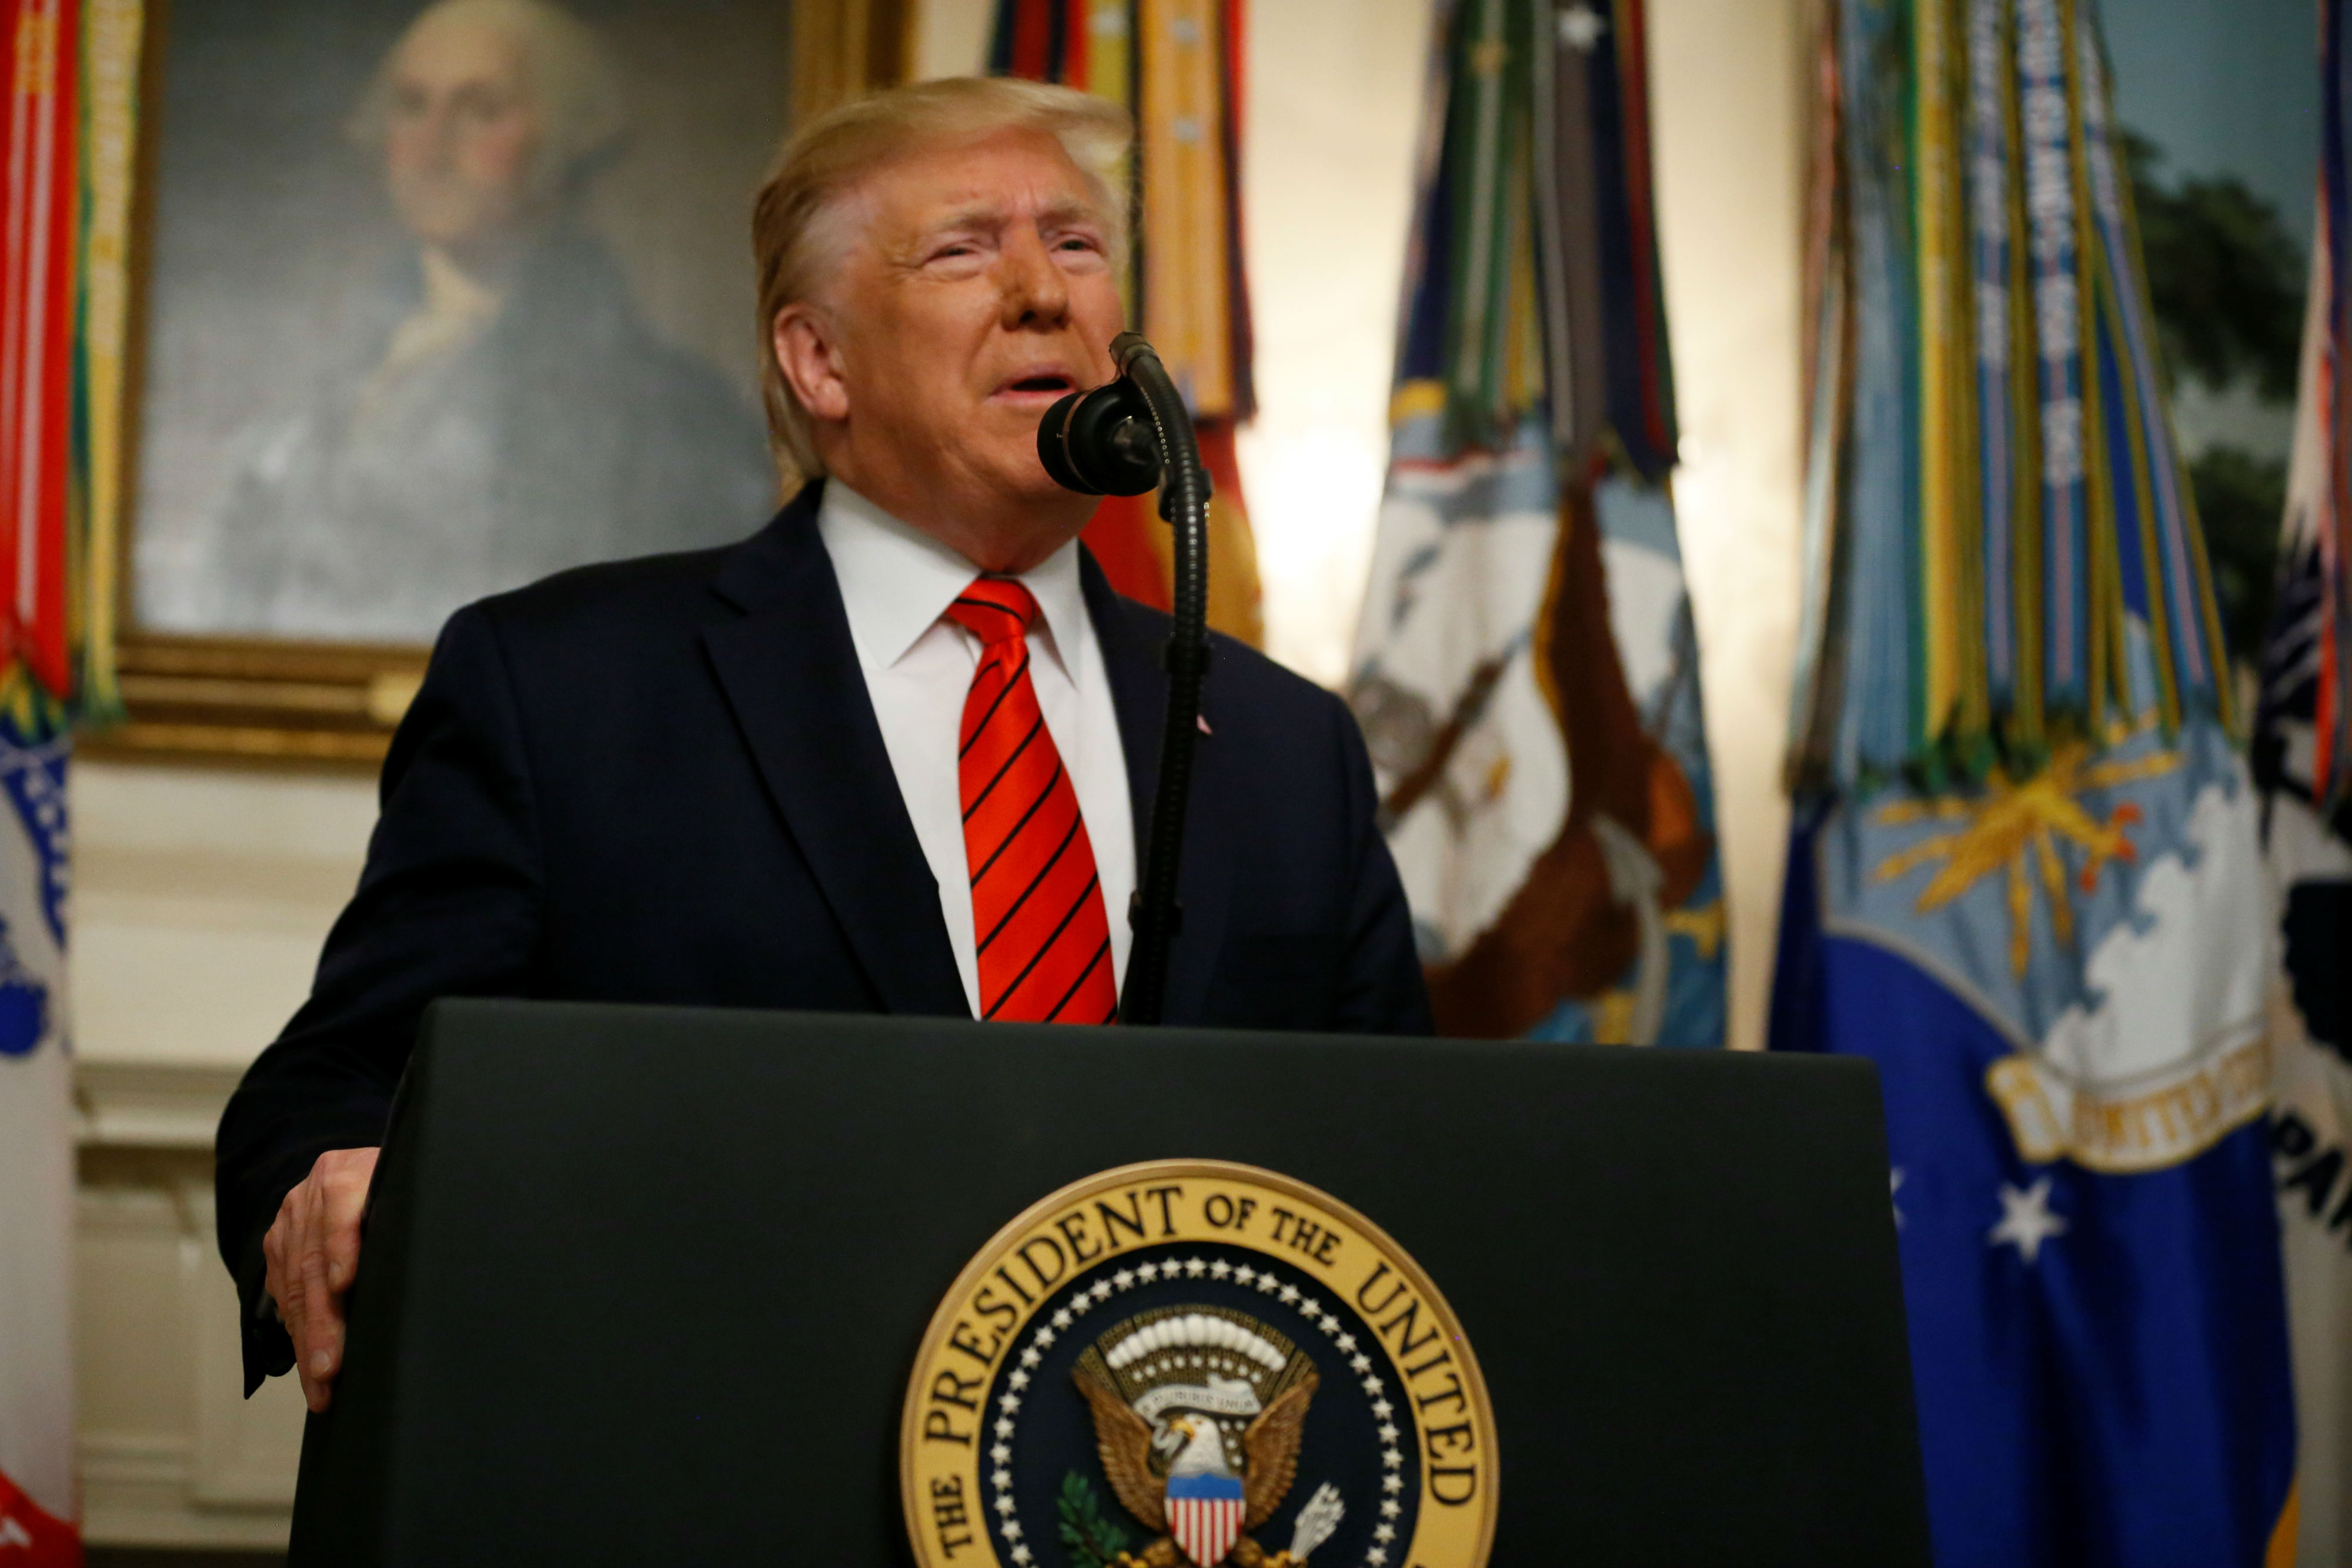 Donald Trump makes a statement at the White House following reports that US forces attacked Islamic State leader Abu Bakr al-Baghdadi in northern Syria (Reuters)